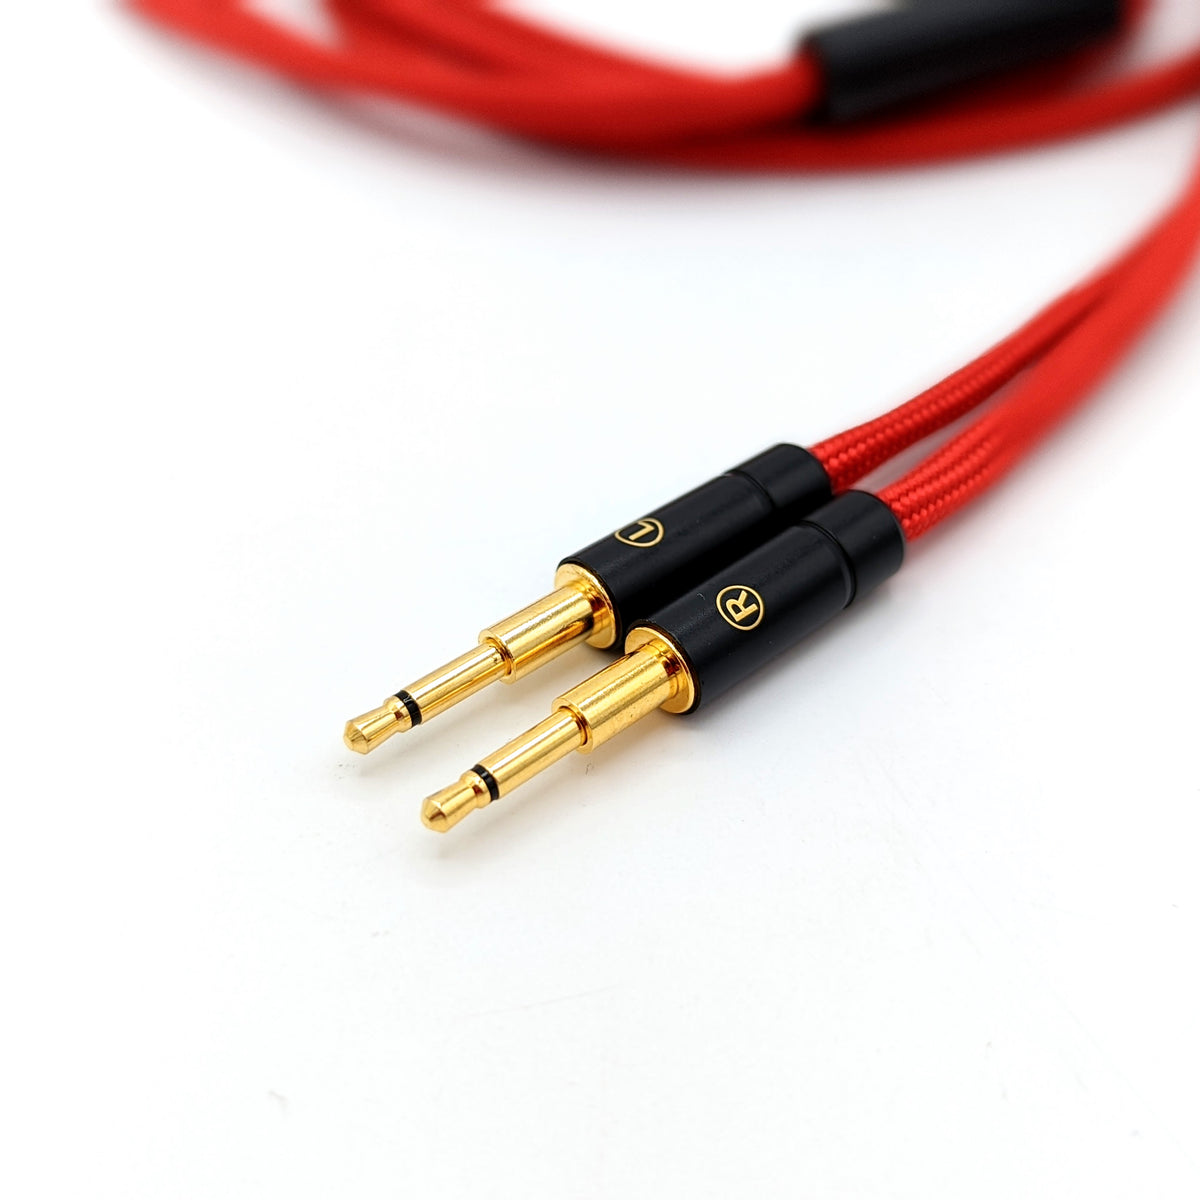 CST-HC-7-L: Dual 2.5mm Balanced Headphone Cable for HD700